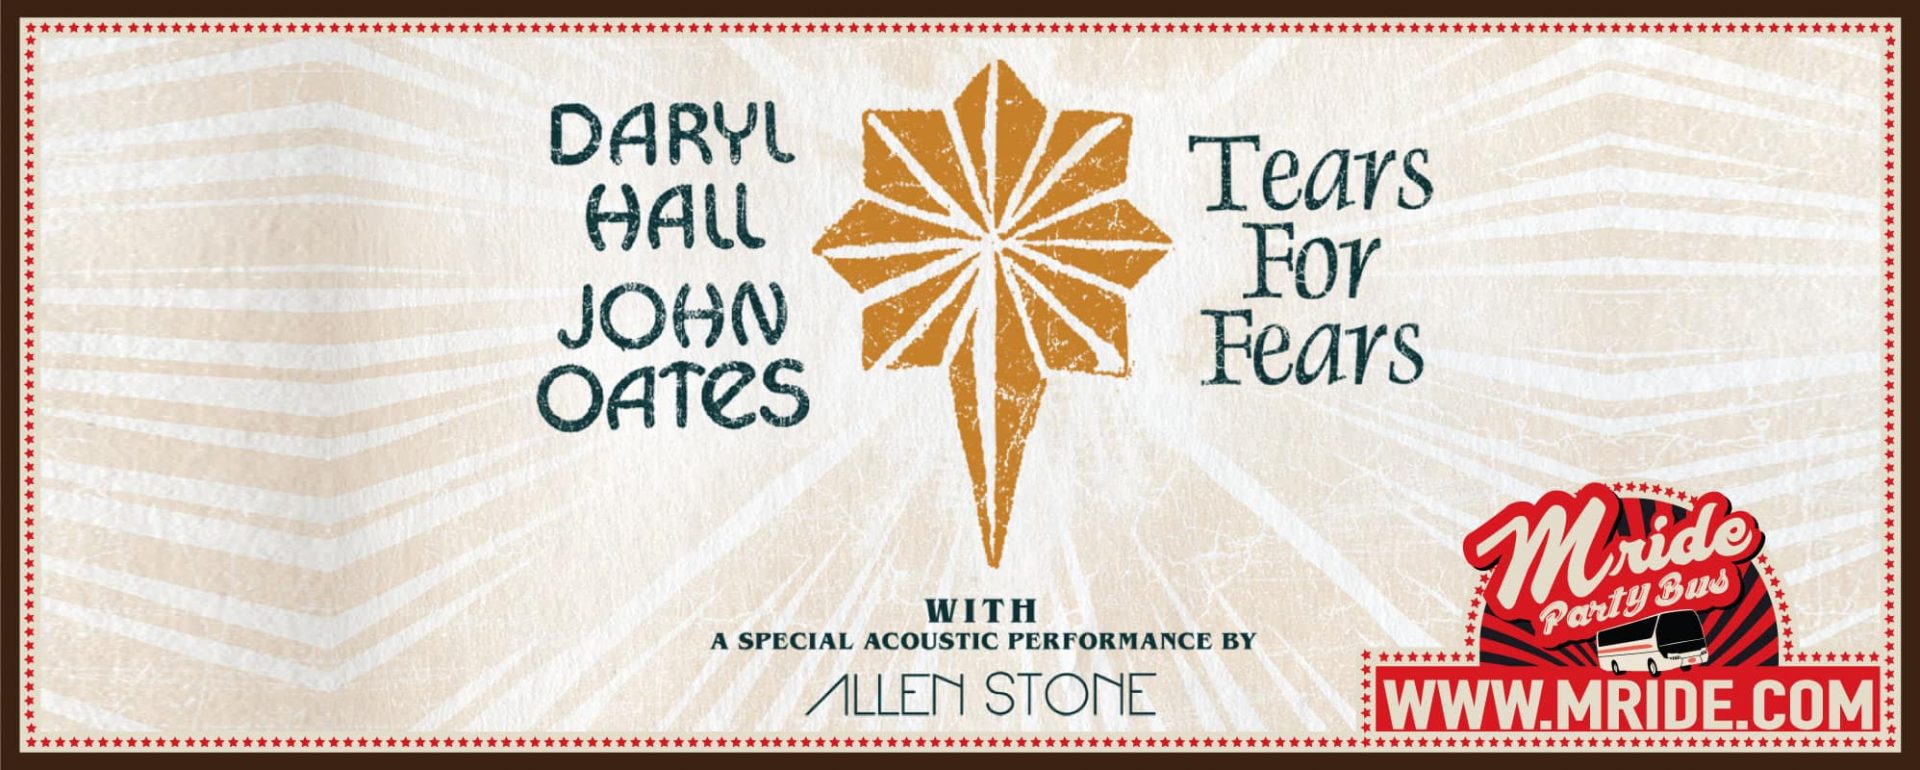 Hall and Oates & Tears For Fears Concert